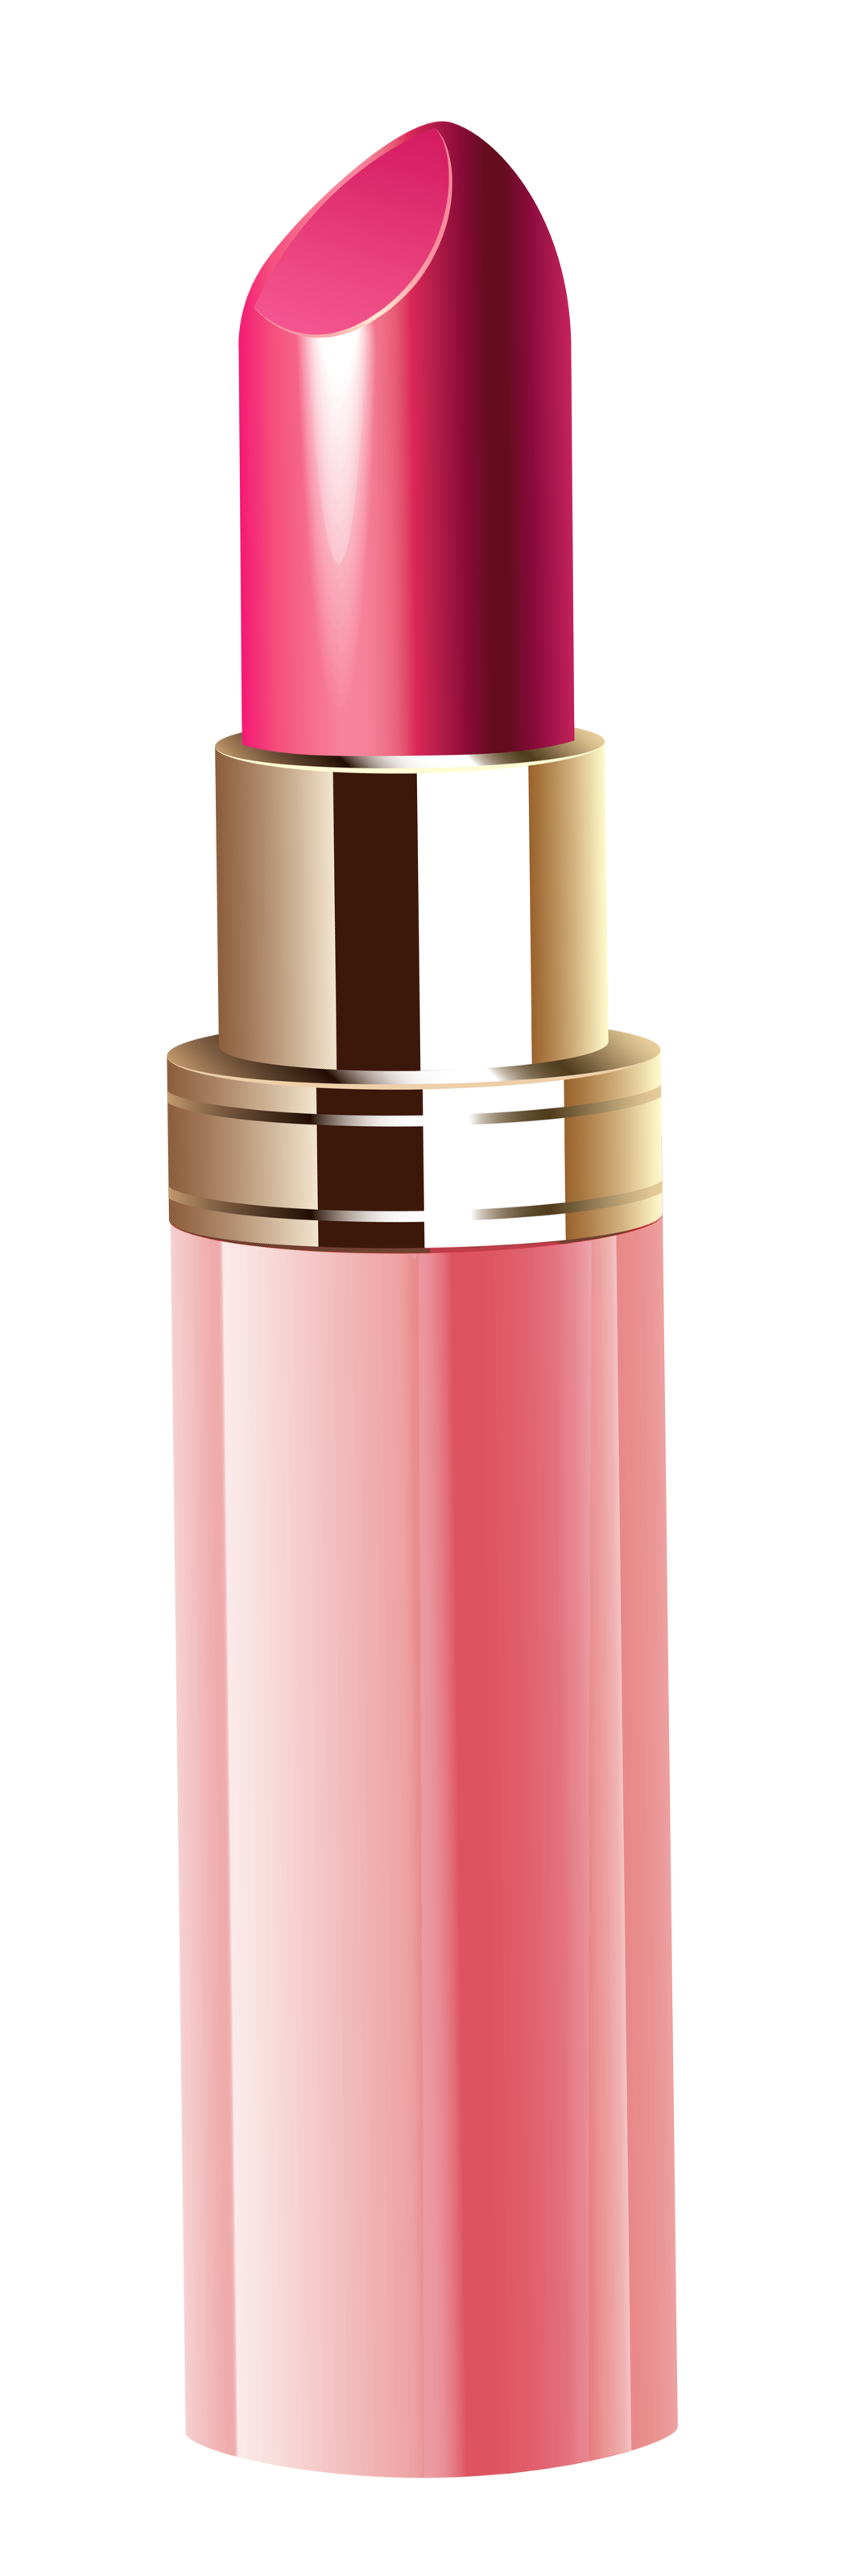 Pink Lipstick PNG Clipart Image